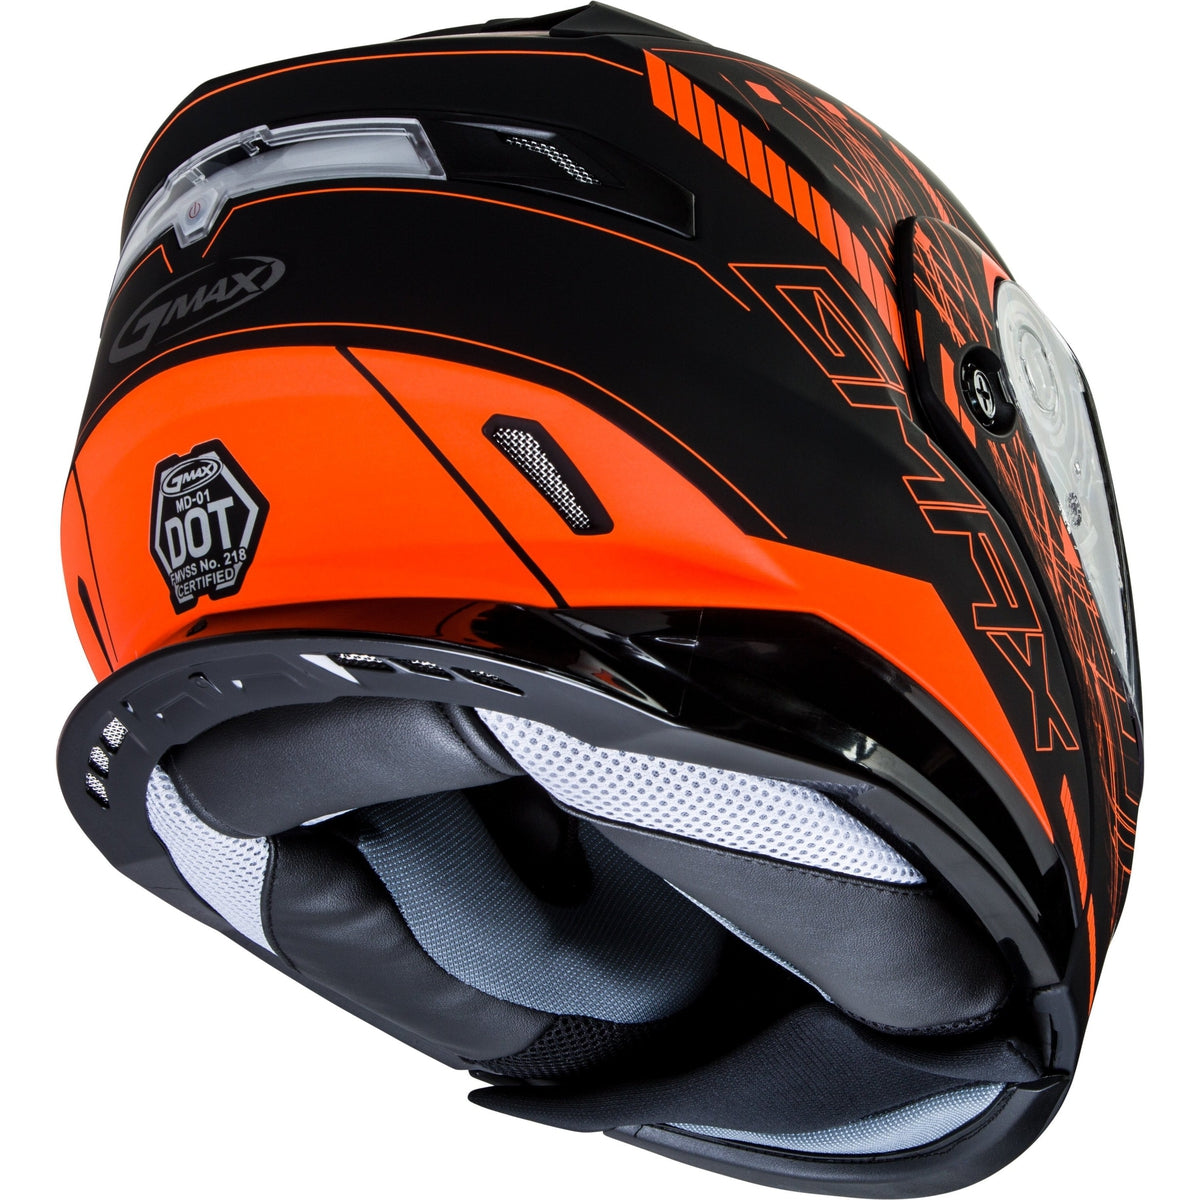 GMax MD01 Modular Helmet with Electric Shield